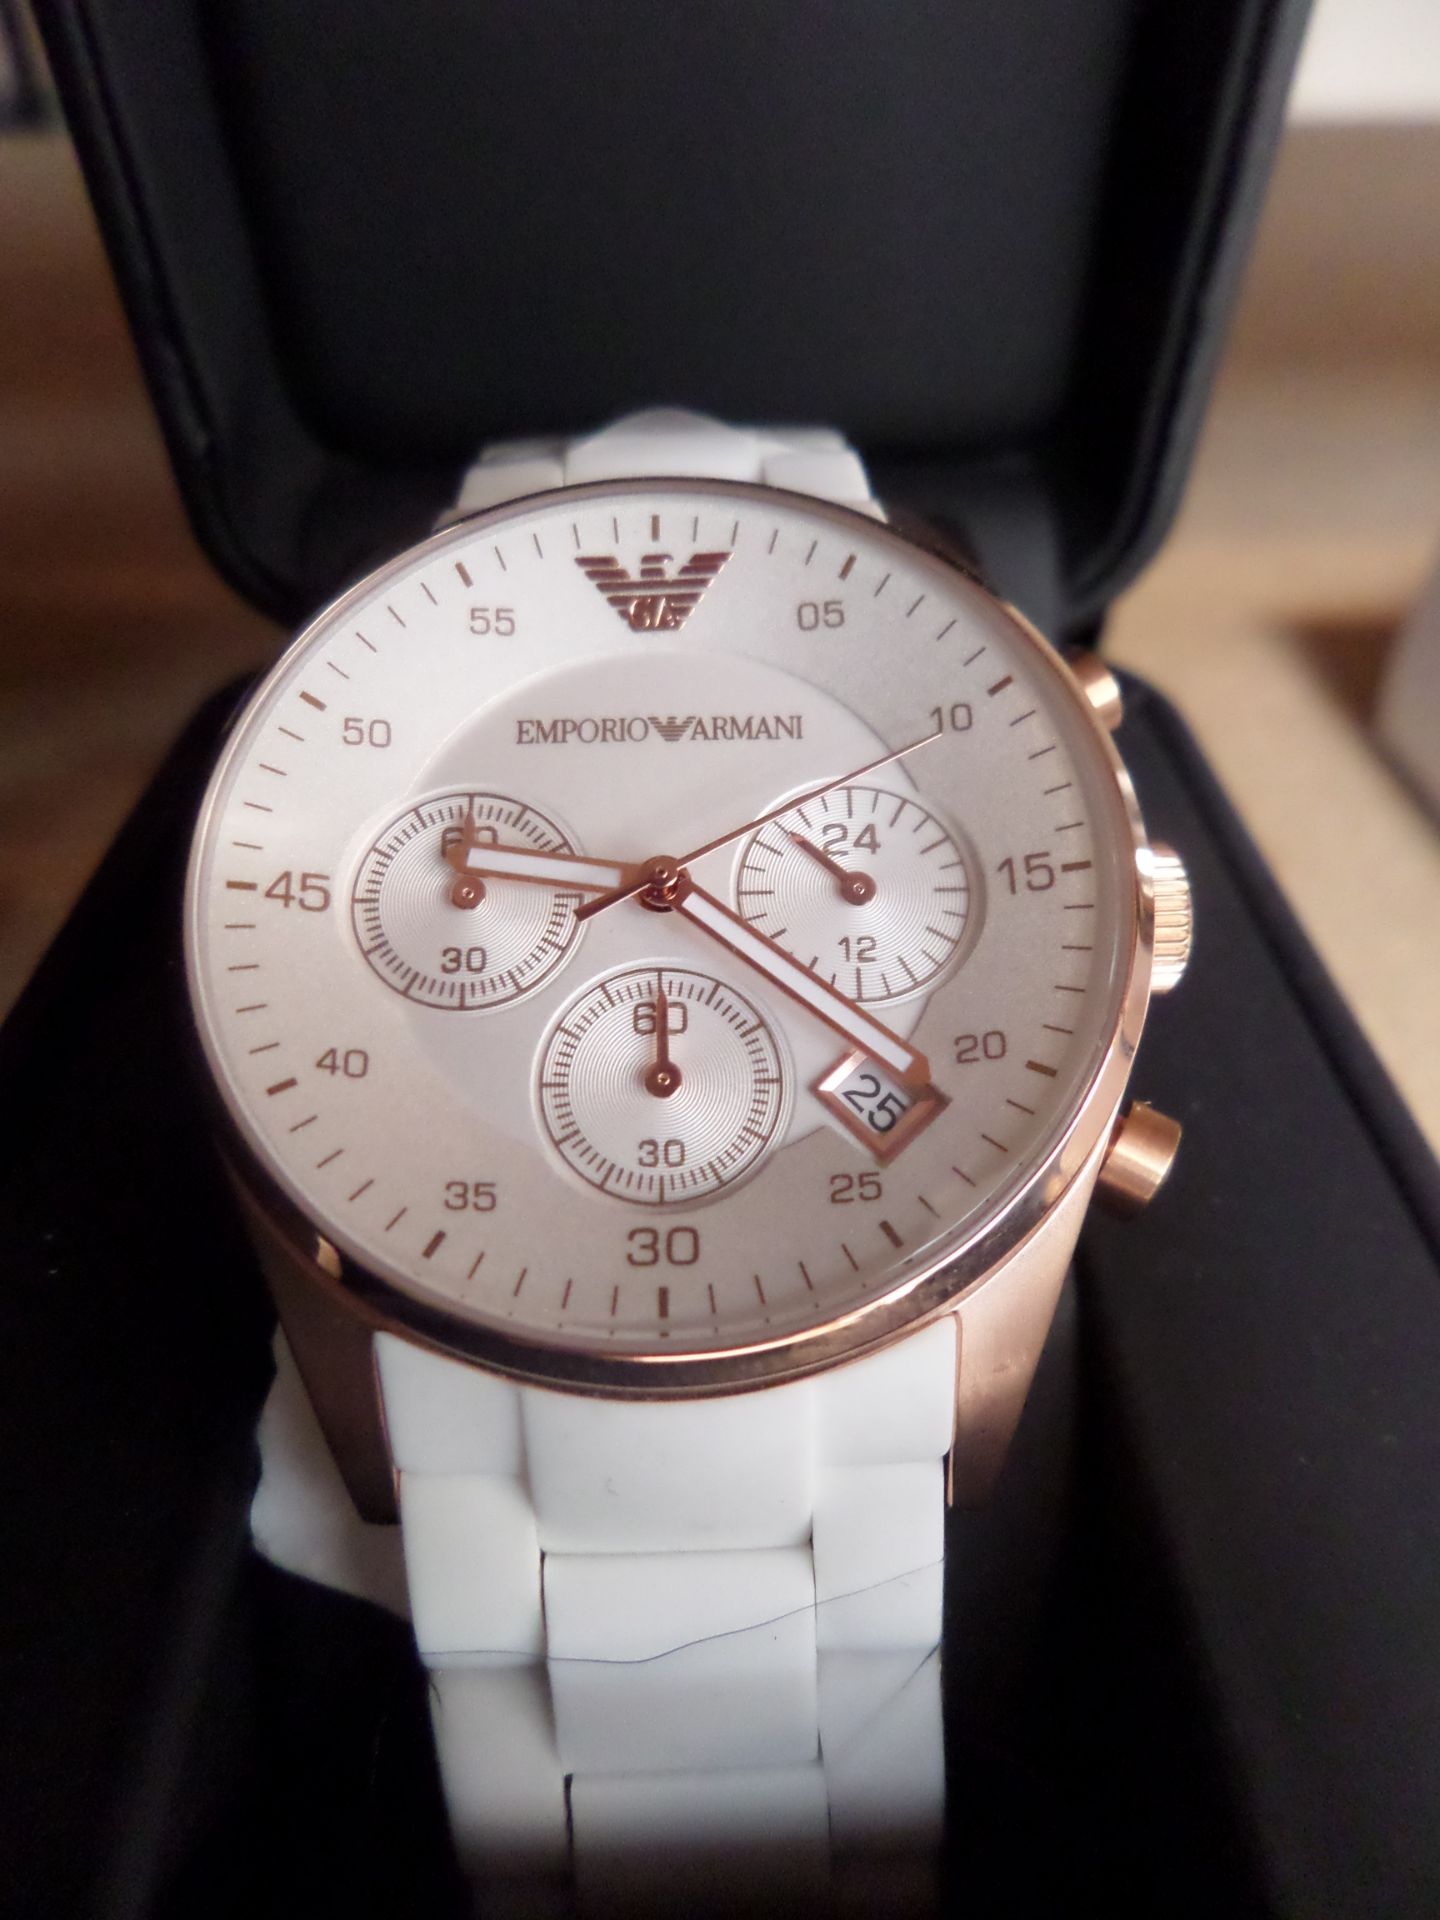 Emporio Armani Women's Bracelet Chronograph Watch AR5920 _BRAND NEW, BOXED – RRP £395.00_ Pictures - Image 2 of 2